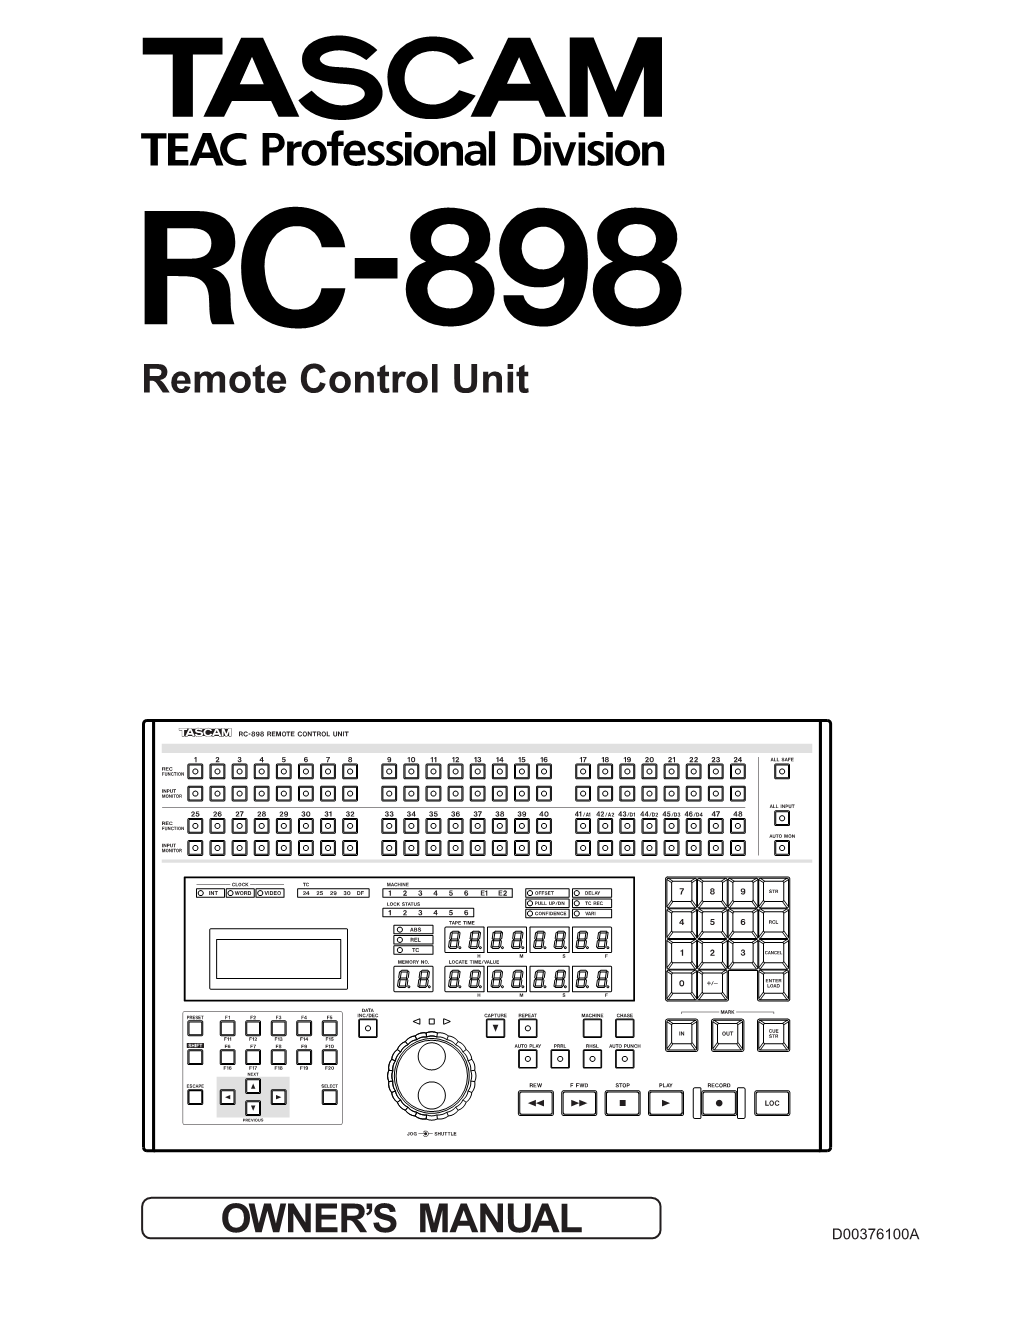 Remote Control Unit OWNER's MANUAL